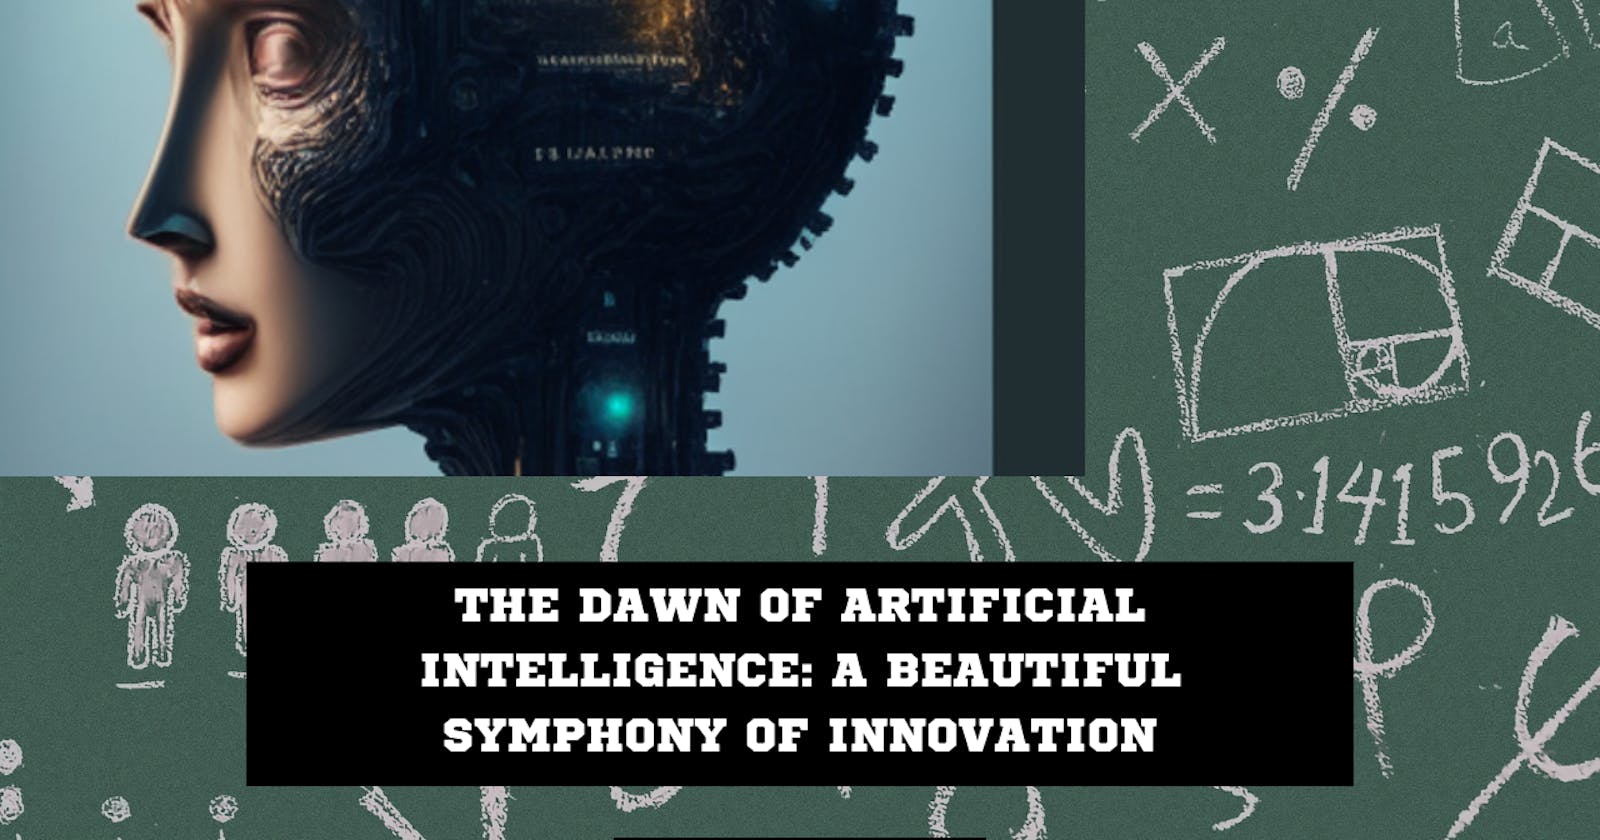 The Dawn of Artificial Intelligence: A Beautiful Symphony of Innovation